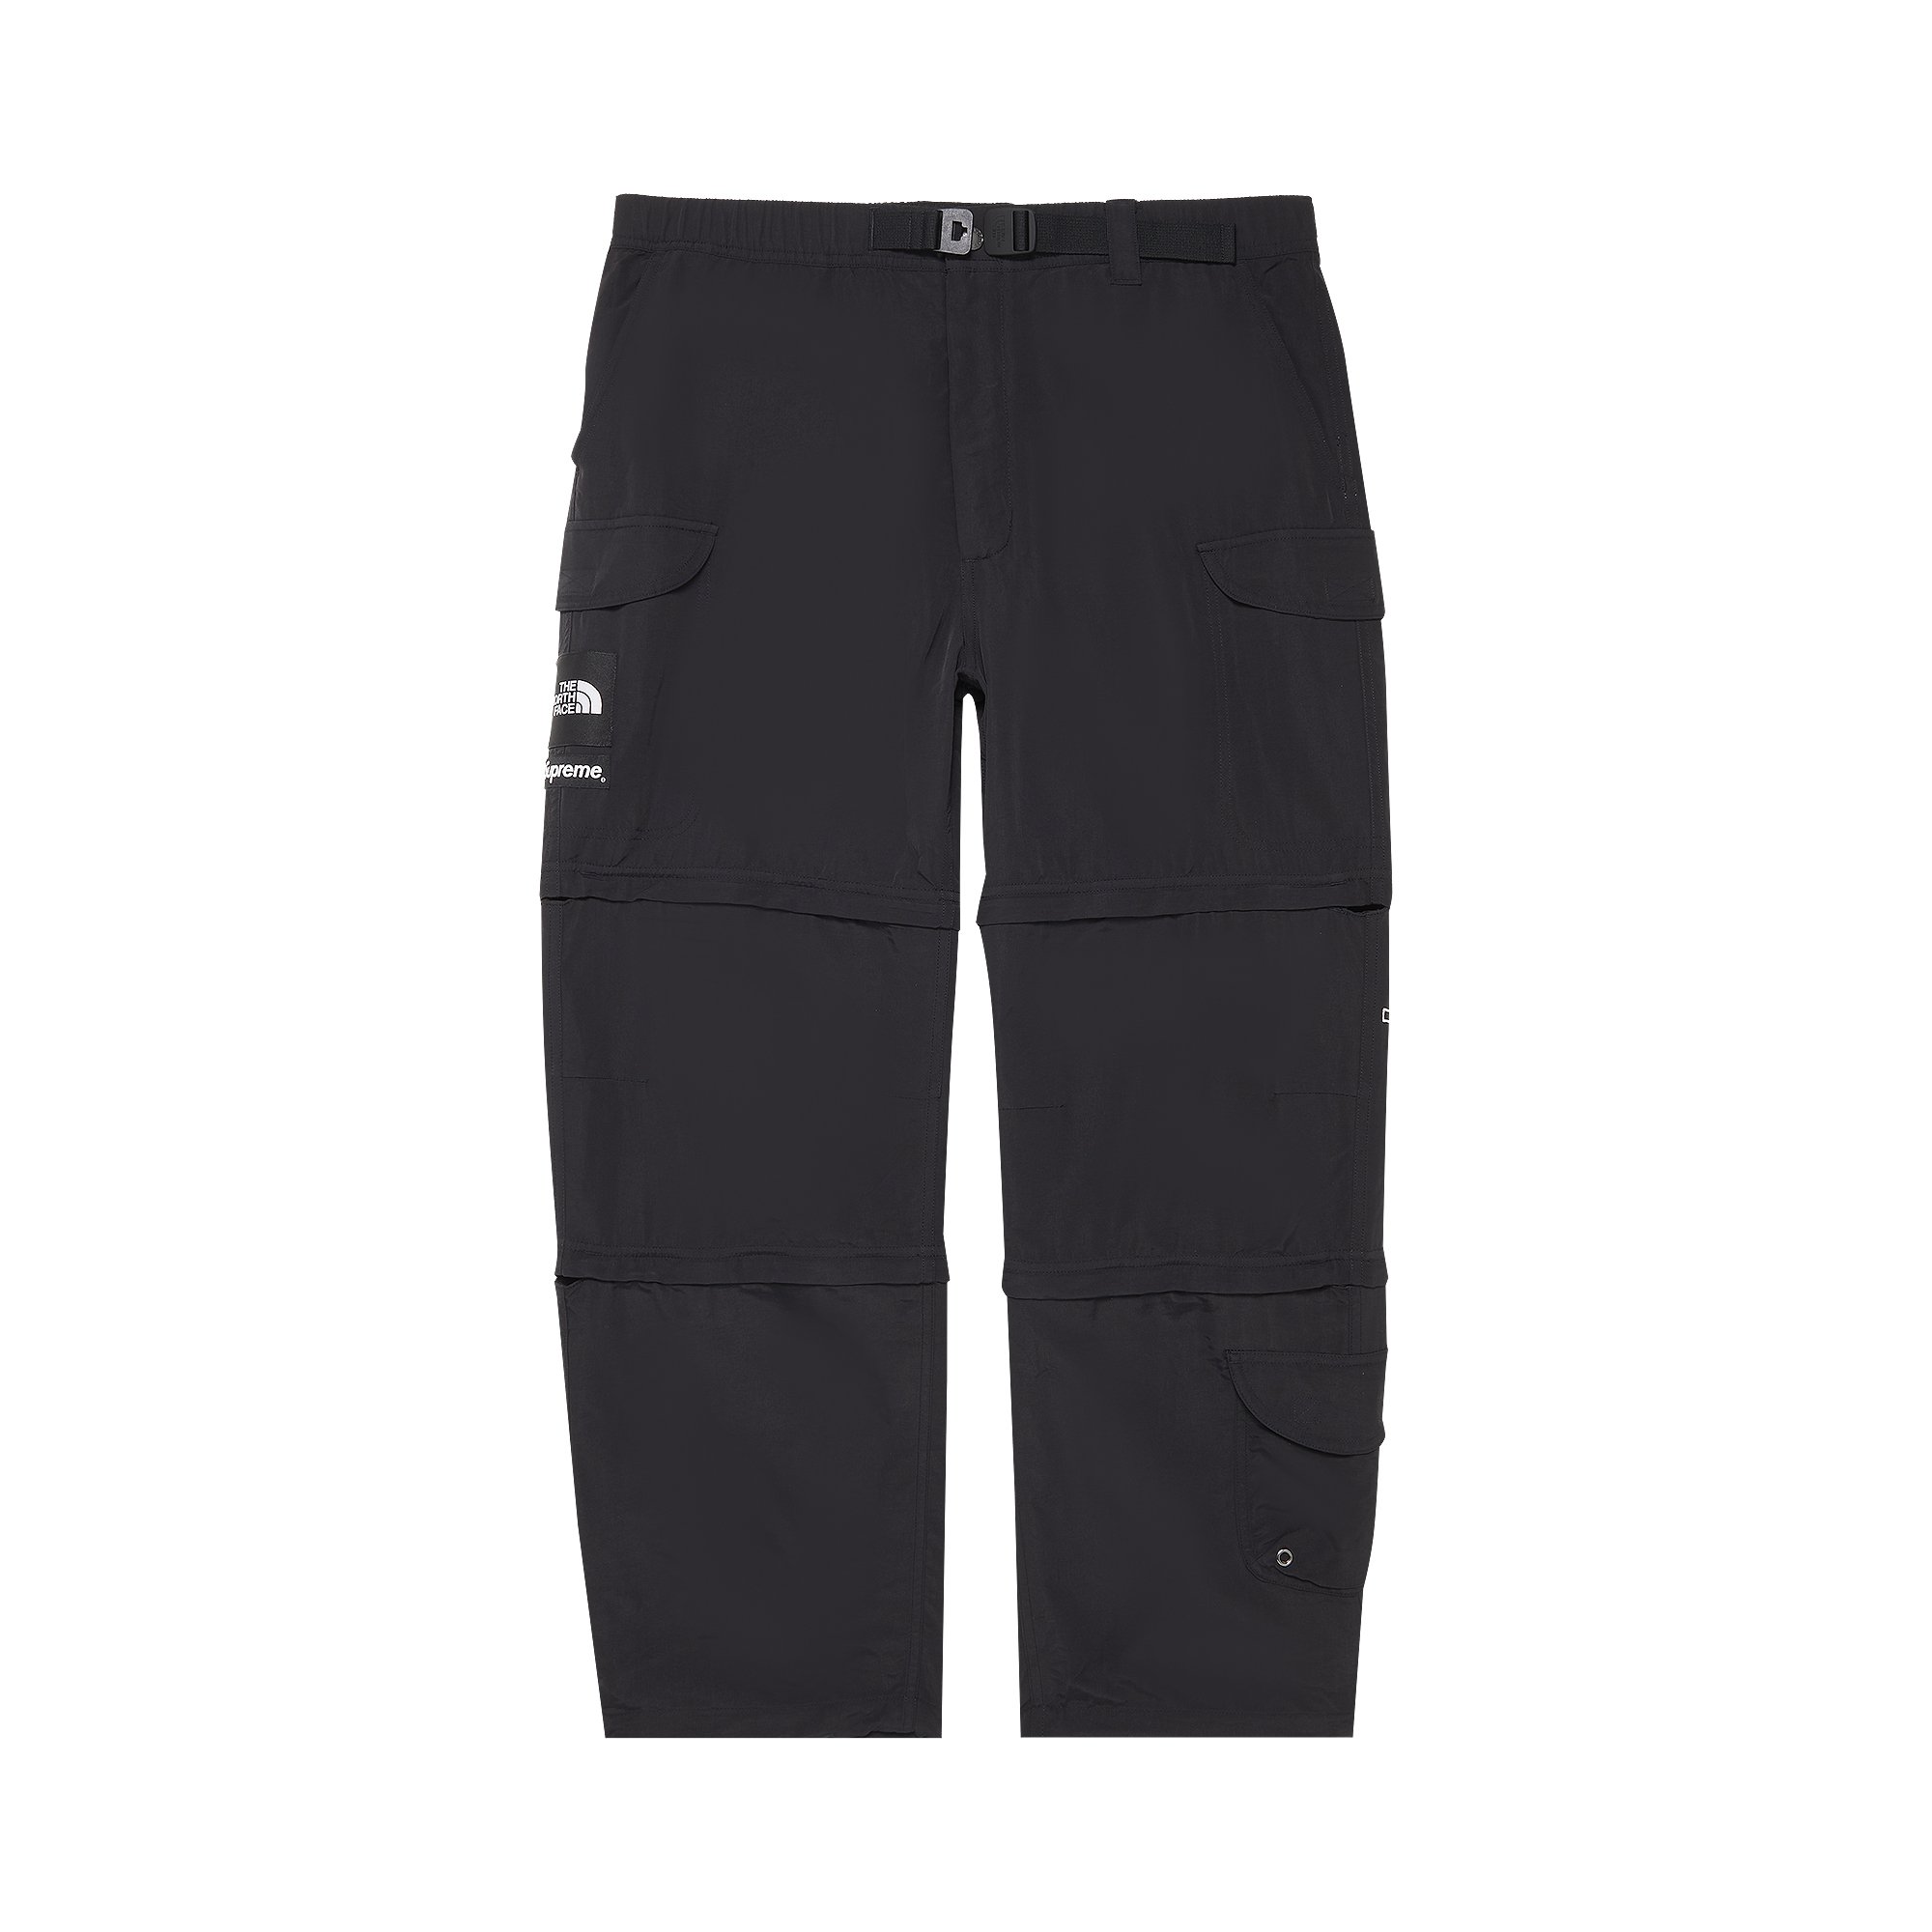 Supreme x The North Face Trekking Zip-Off Belted Pant 'Black'